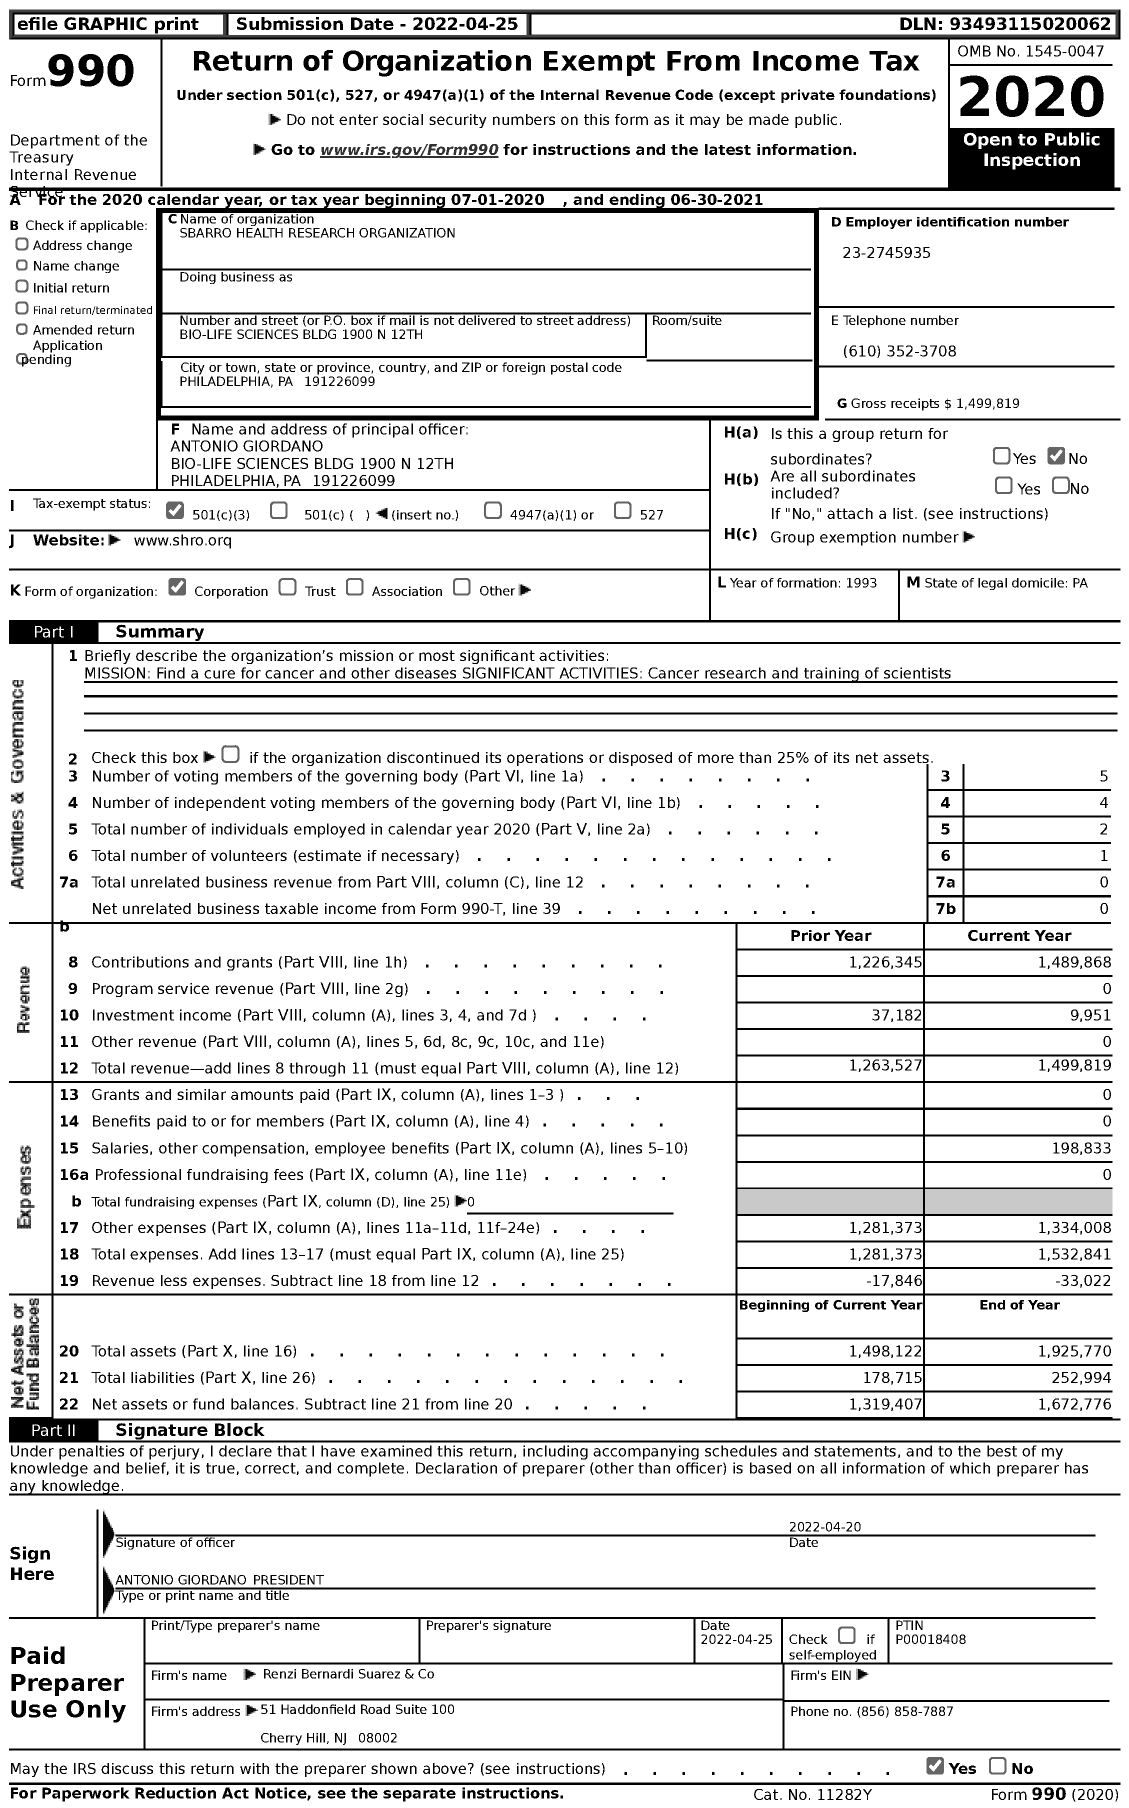 Image of first page of 2020 Form 990 for Sbarro Health Research Organization